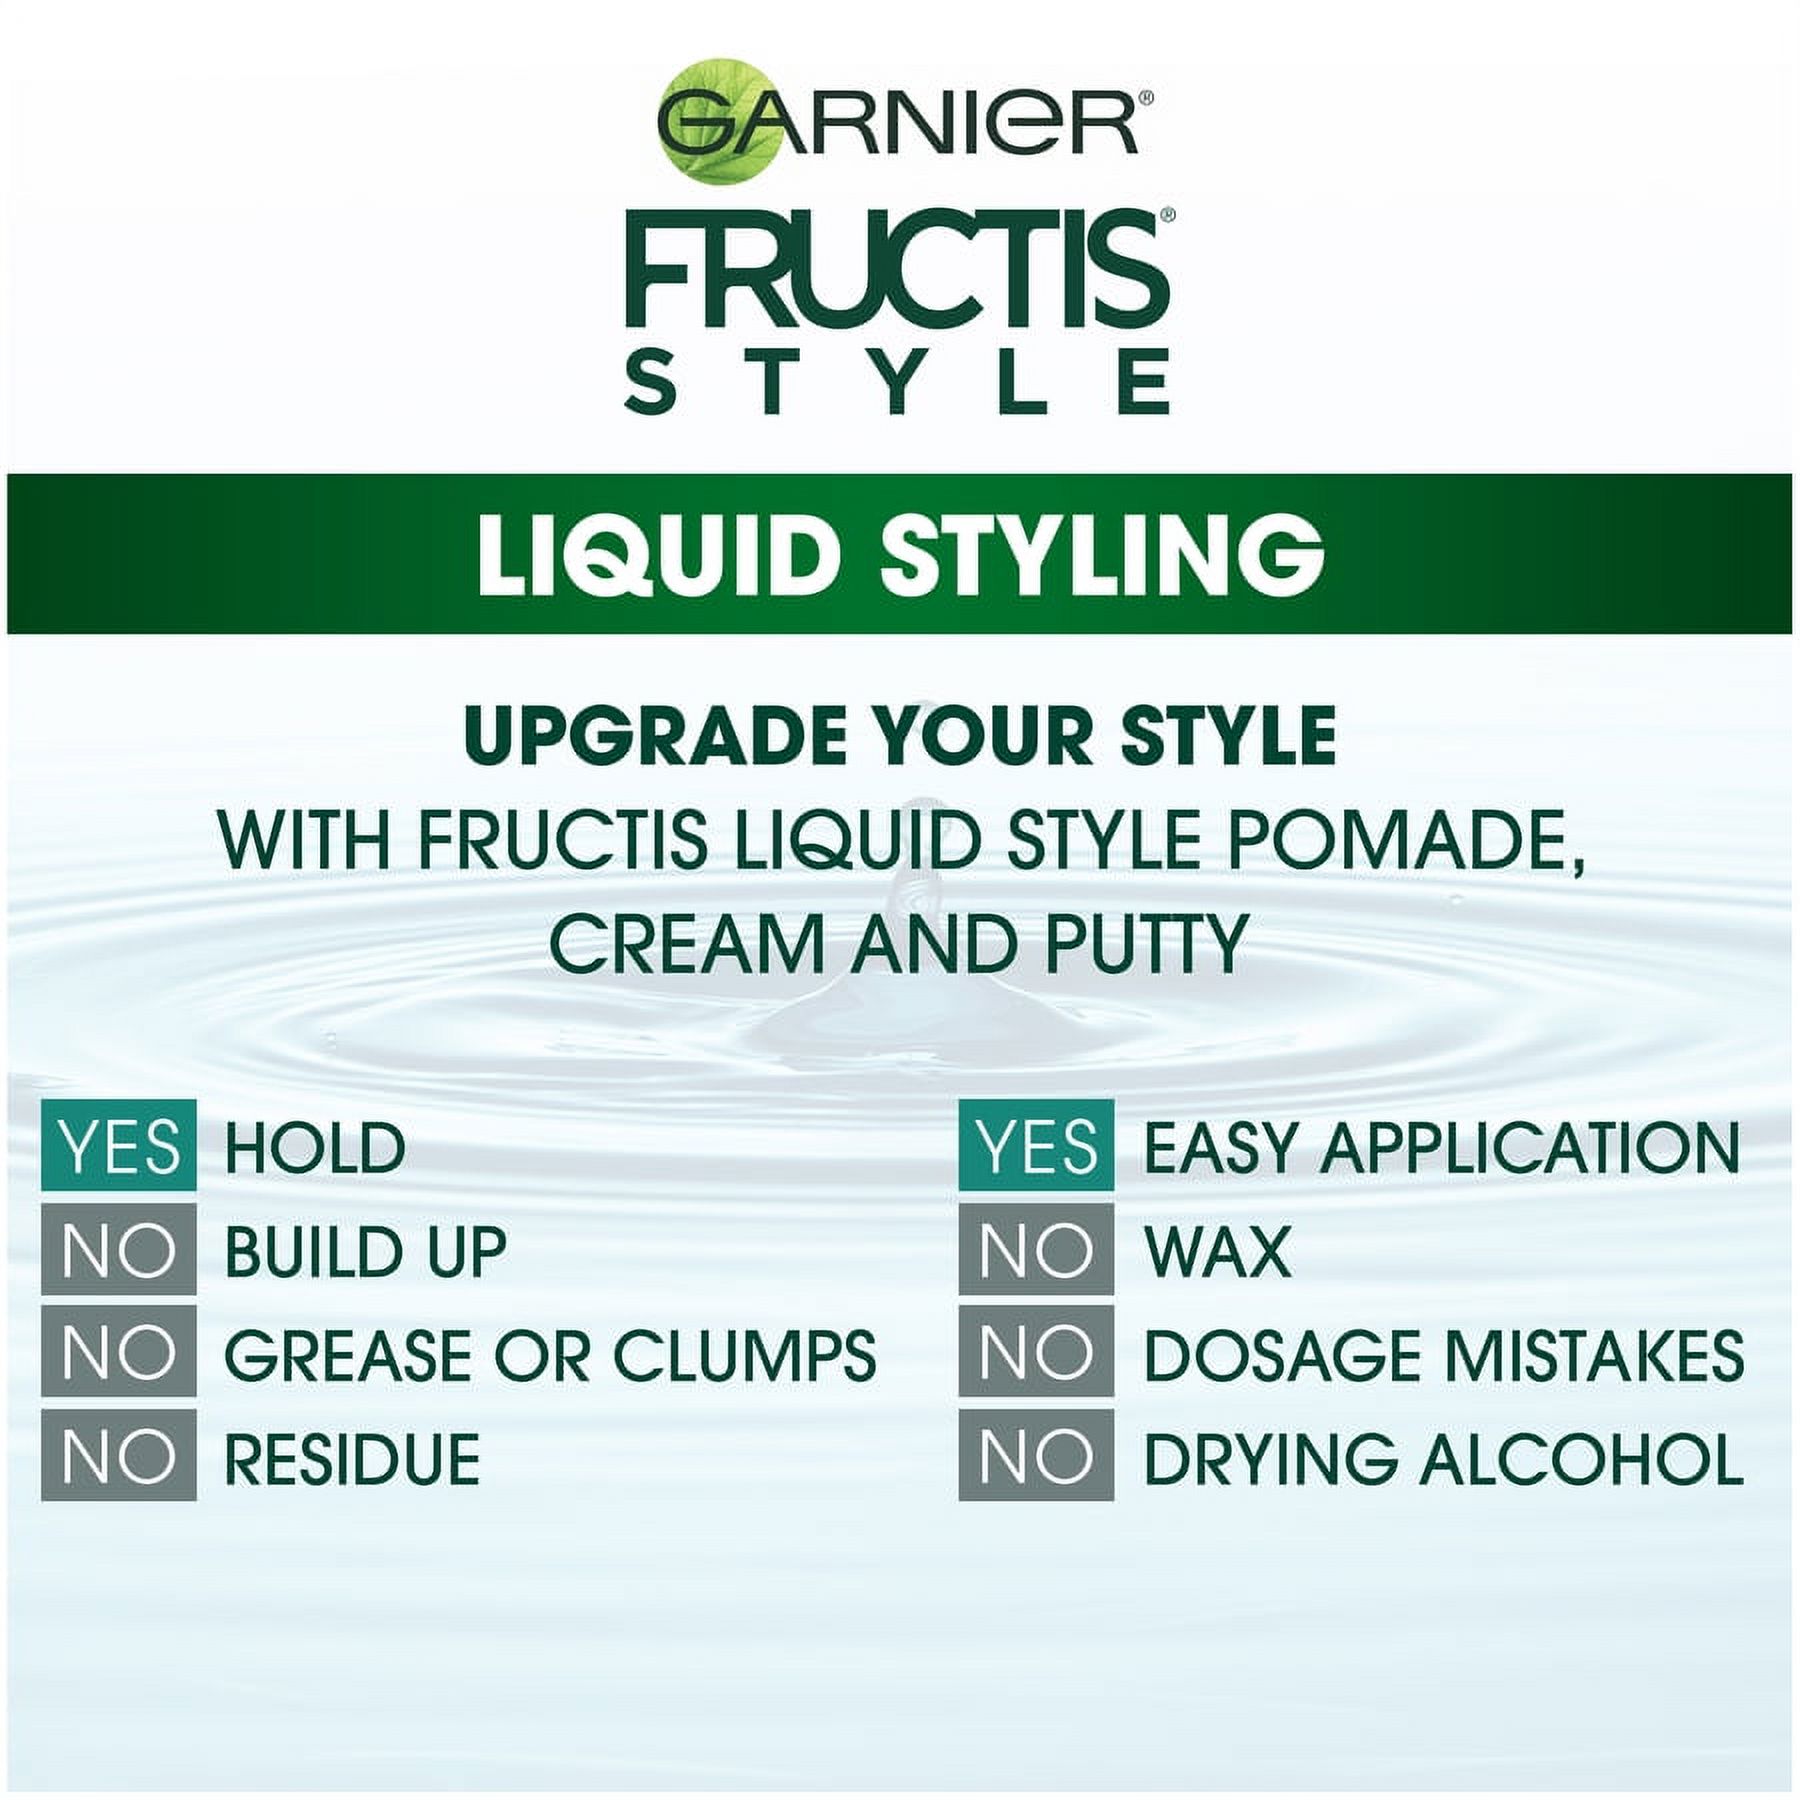 Garnier Fructis Style Shine and Hold Liquid Hair Pomade for Men, No Drying Alcohol, 4.2 oz. - image 3 of 8